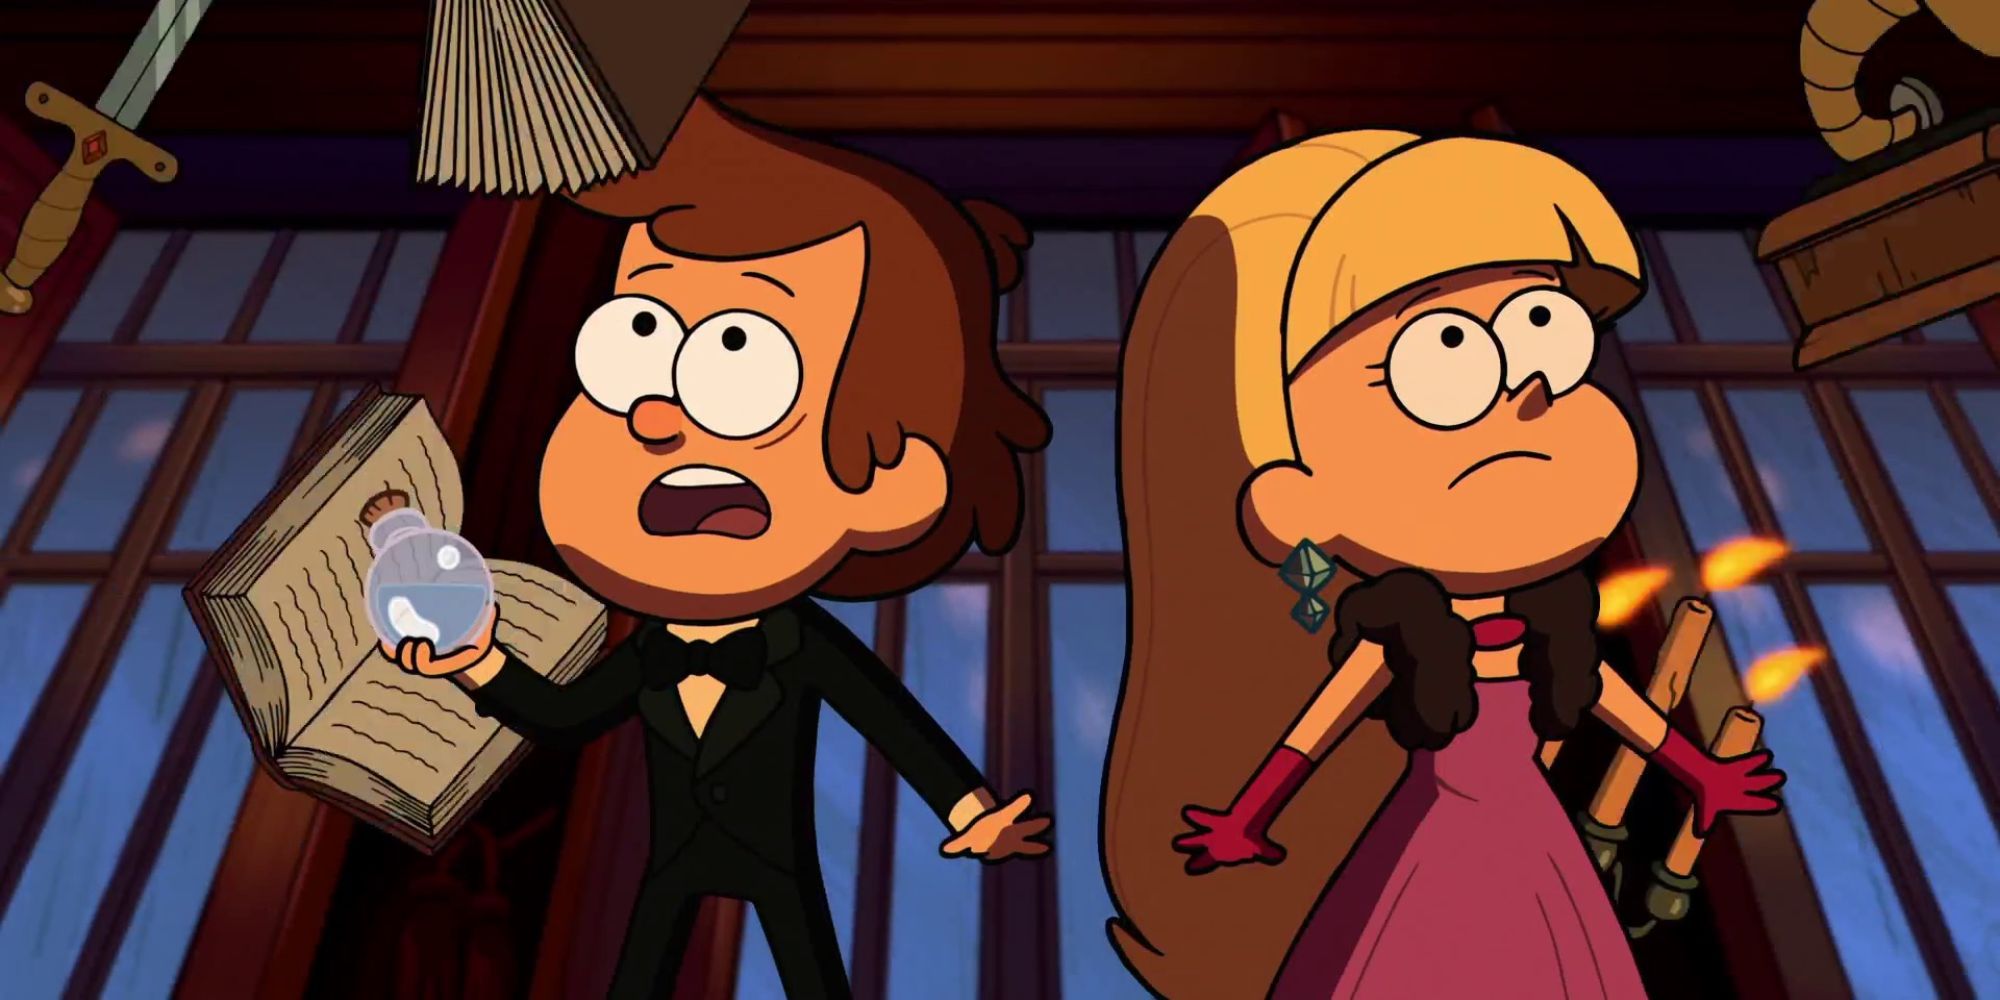 10 Highest-Rated 'Gravity Falls' Episodes, According to IMDb